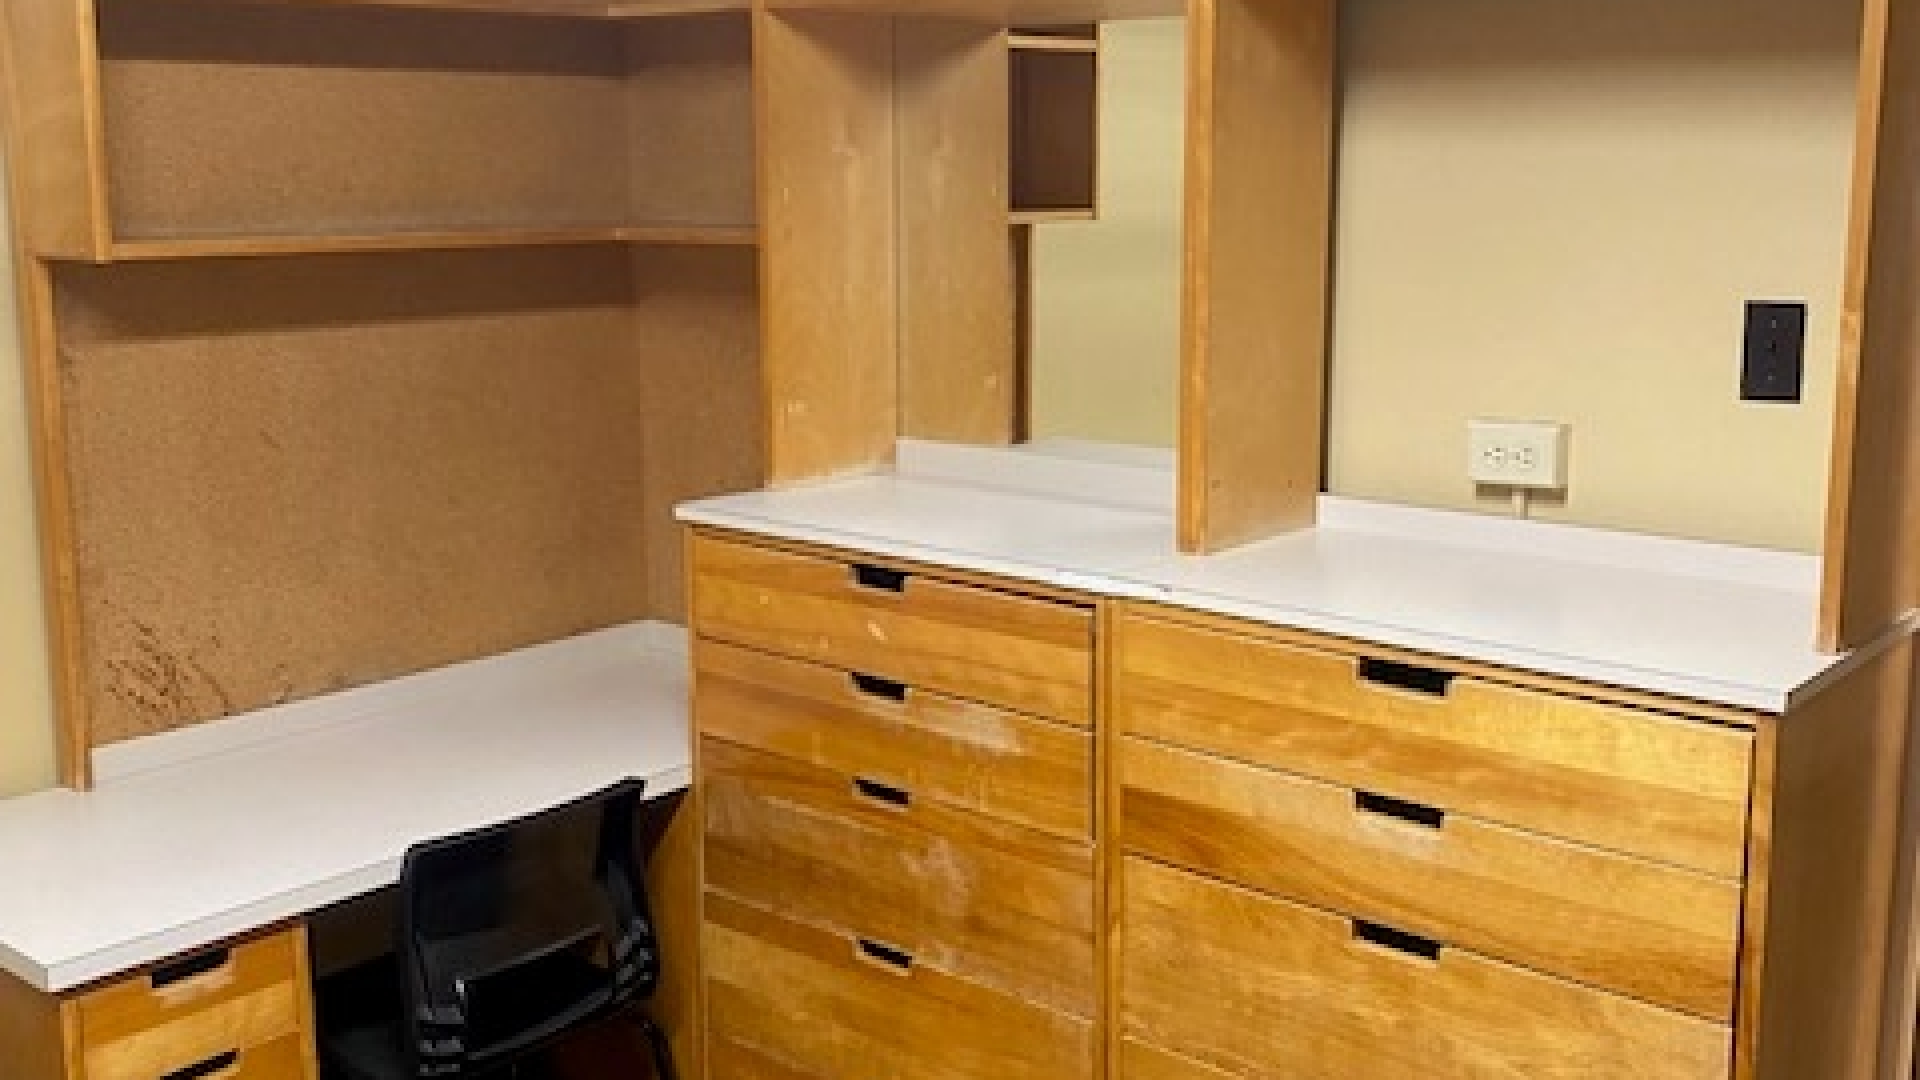 Dressers and Shelving in Cameron Hall